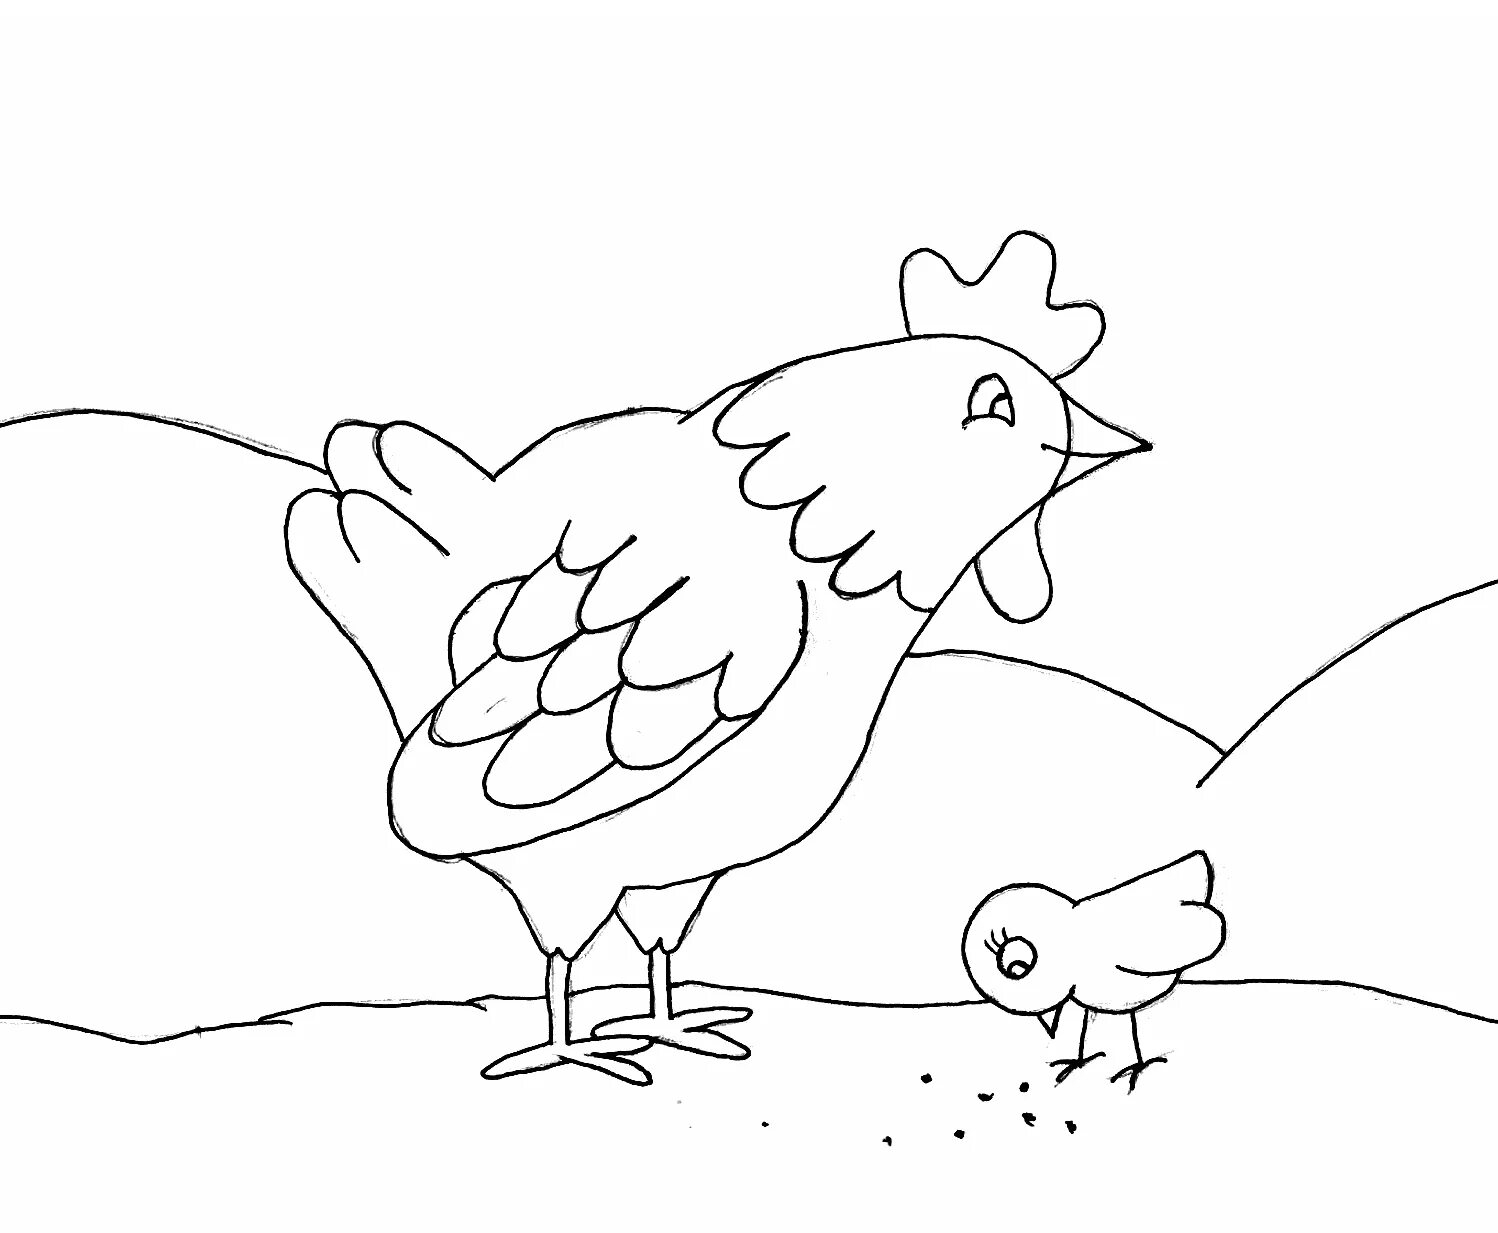 Fancy chicken coloring pages for kids